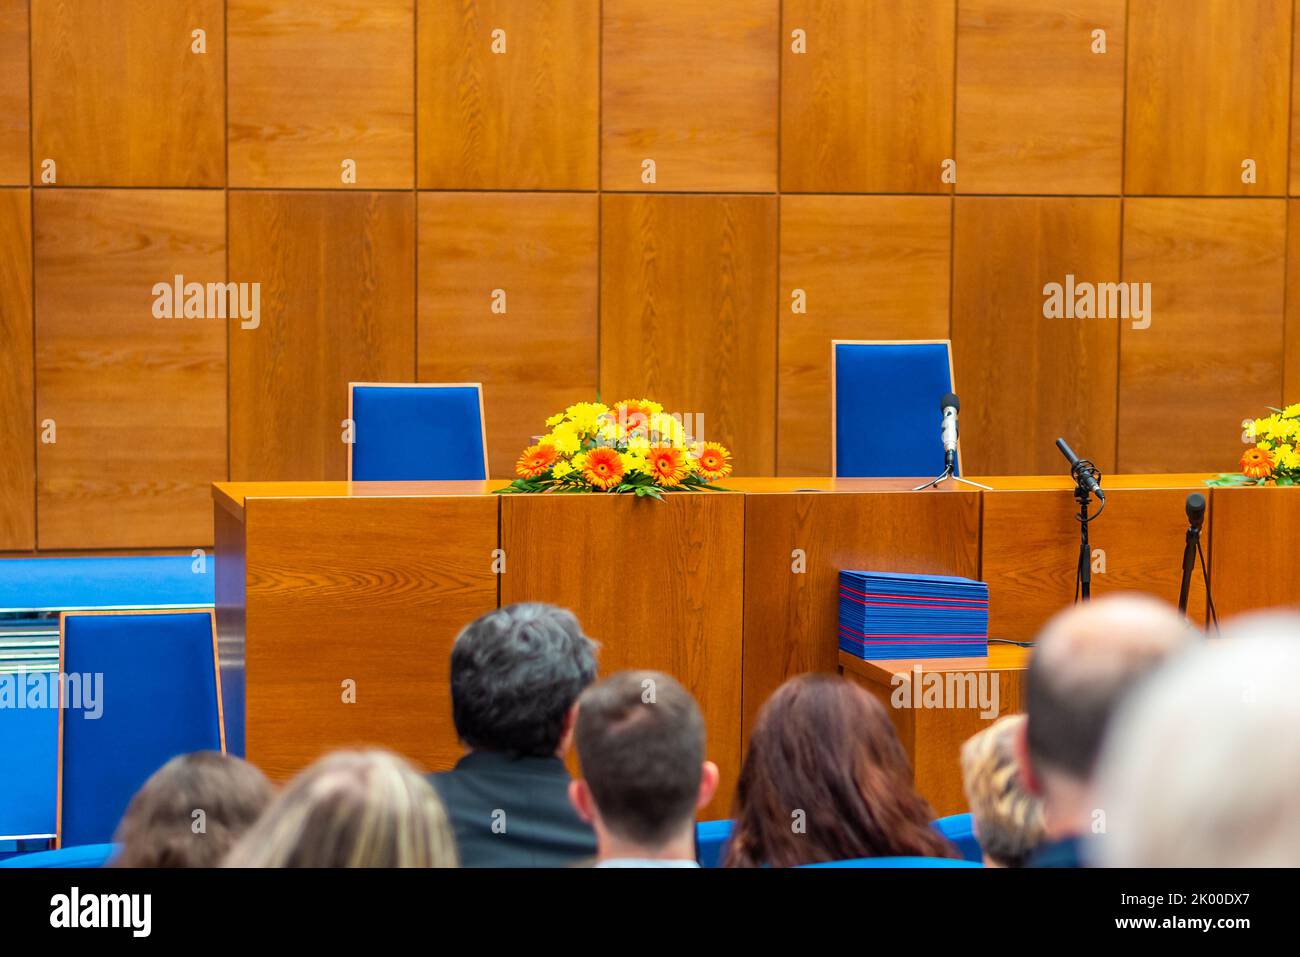 BRNO, CZECH REPUBLIC - 12.7.2019: Graduation ceremony at Masaryk University in Brno. The diploma certificate is prepared on the table. Families of the Stock Photo